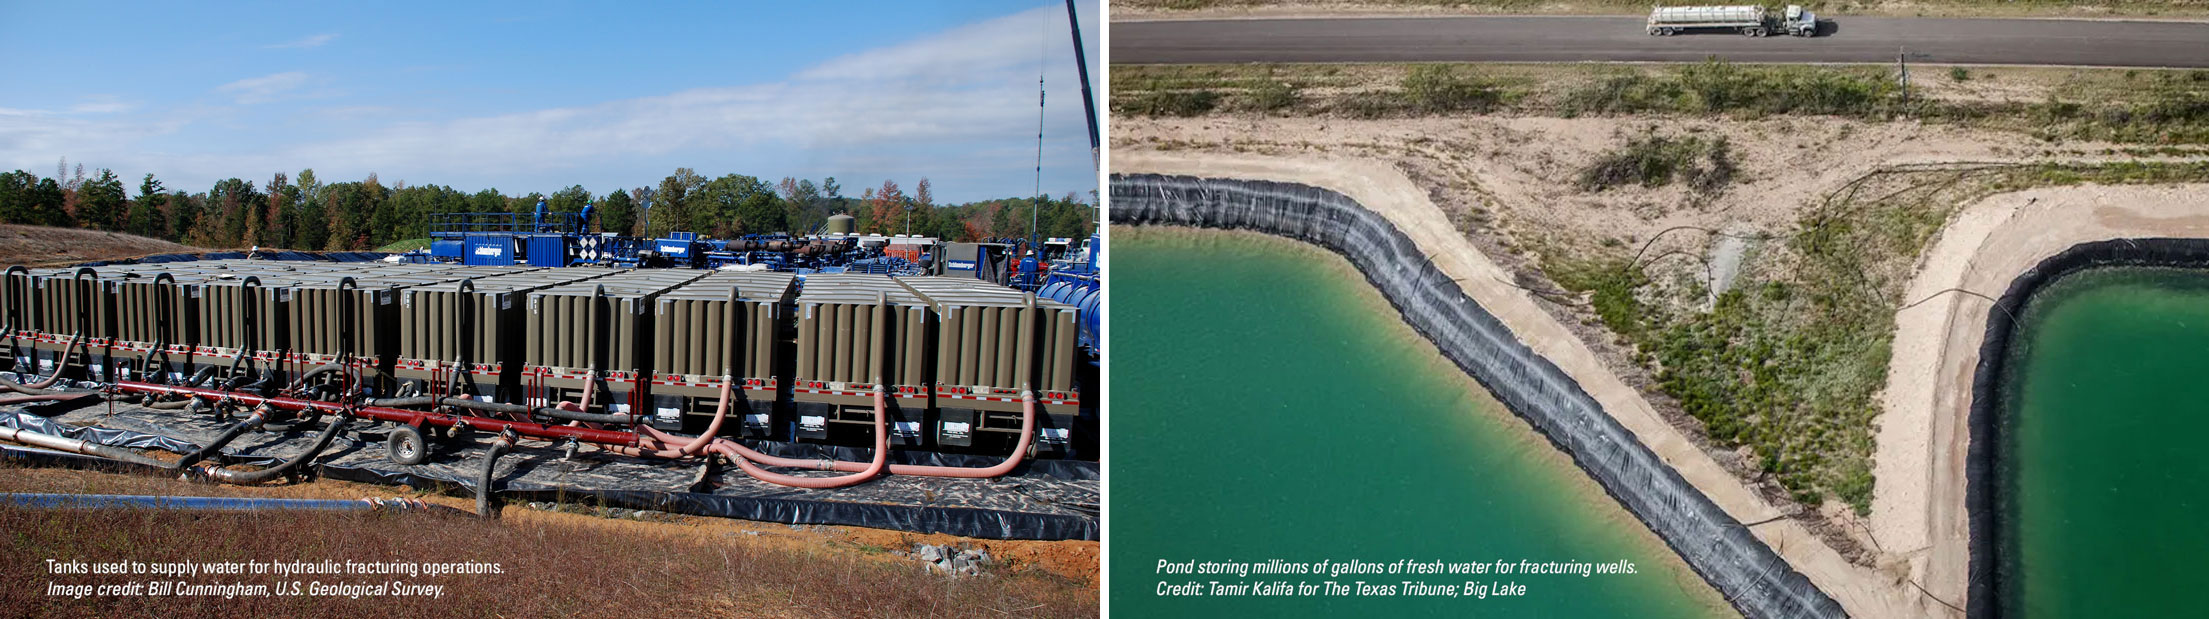 tanks for water pumps fracturing ponds